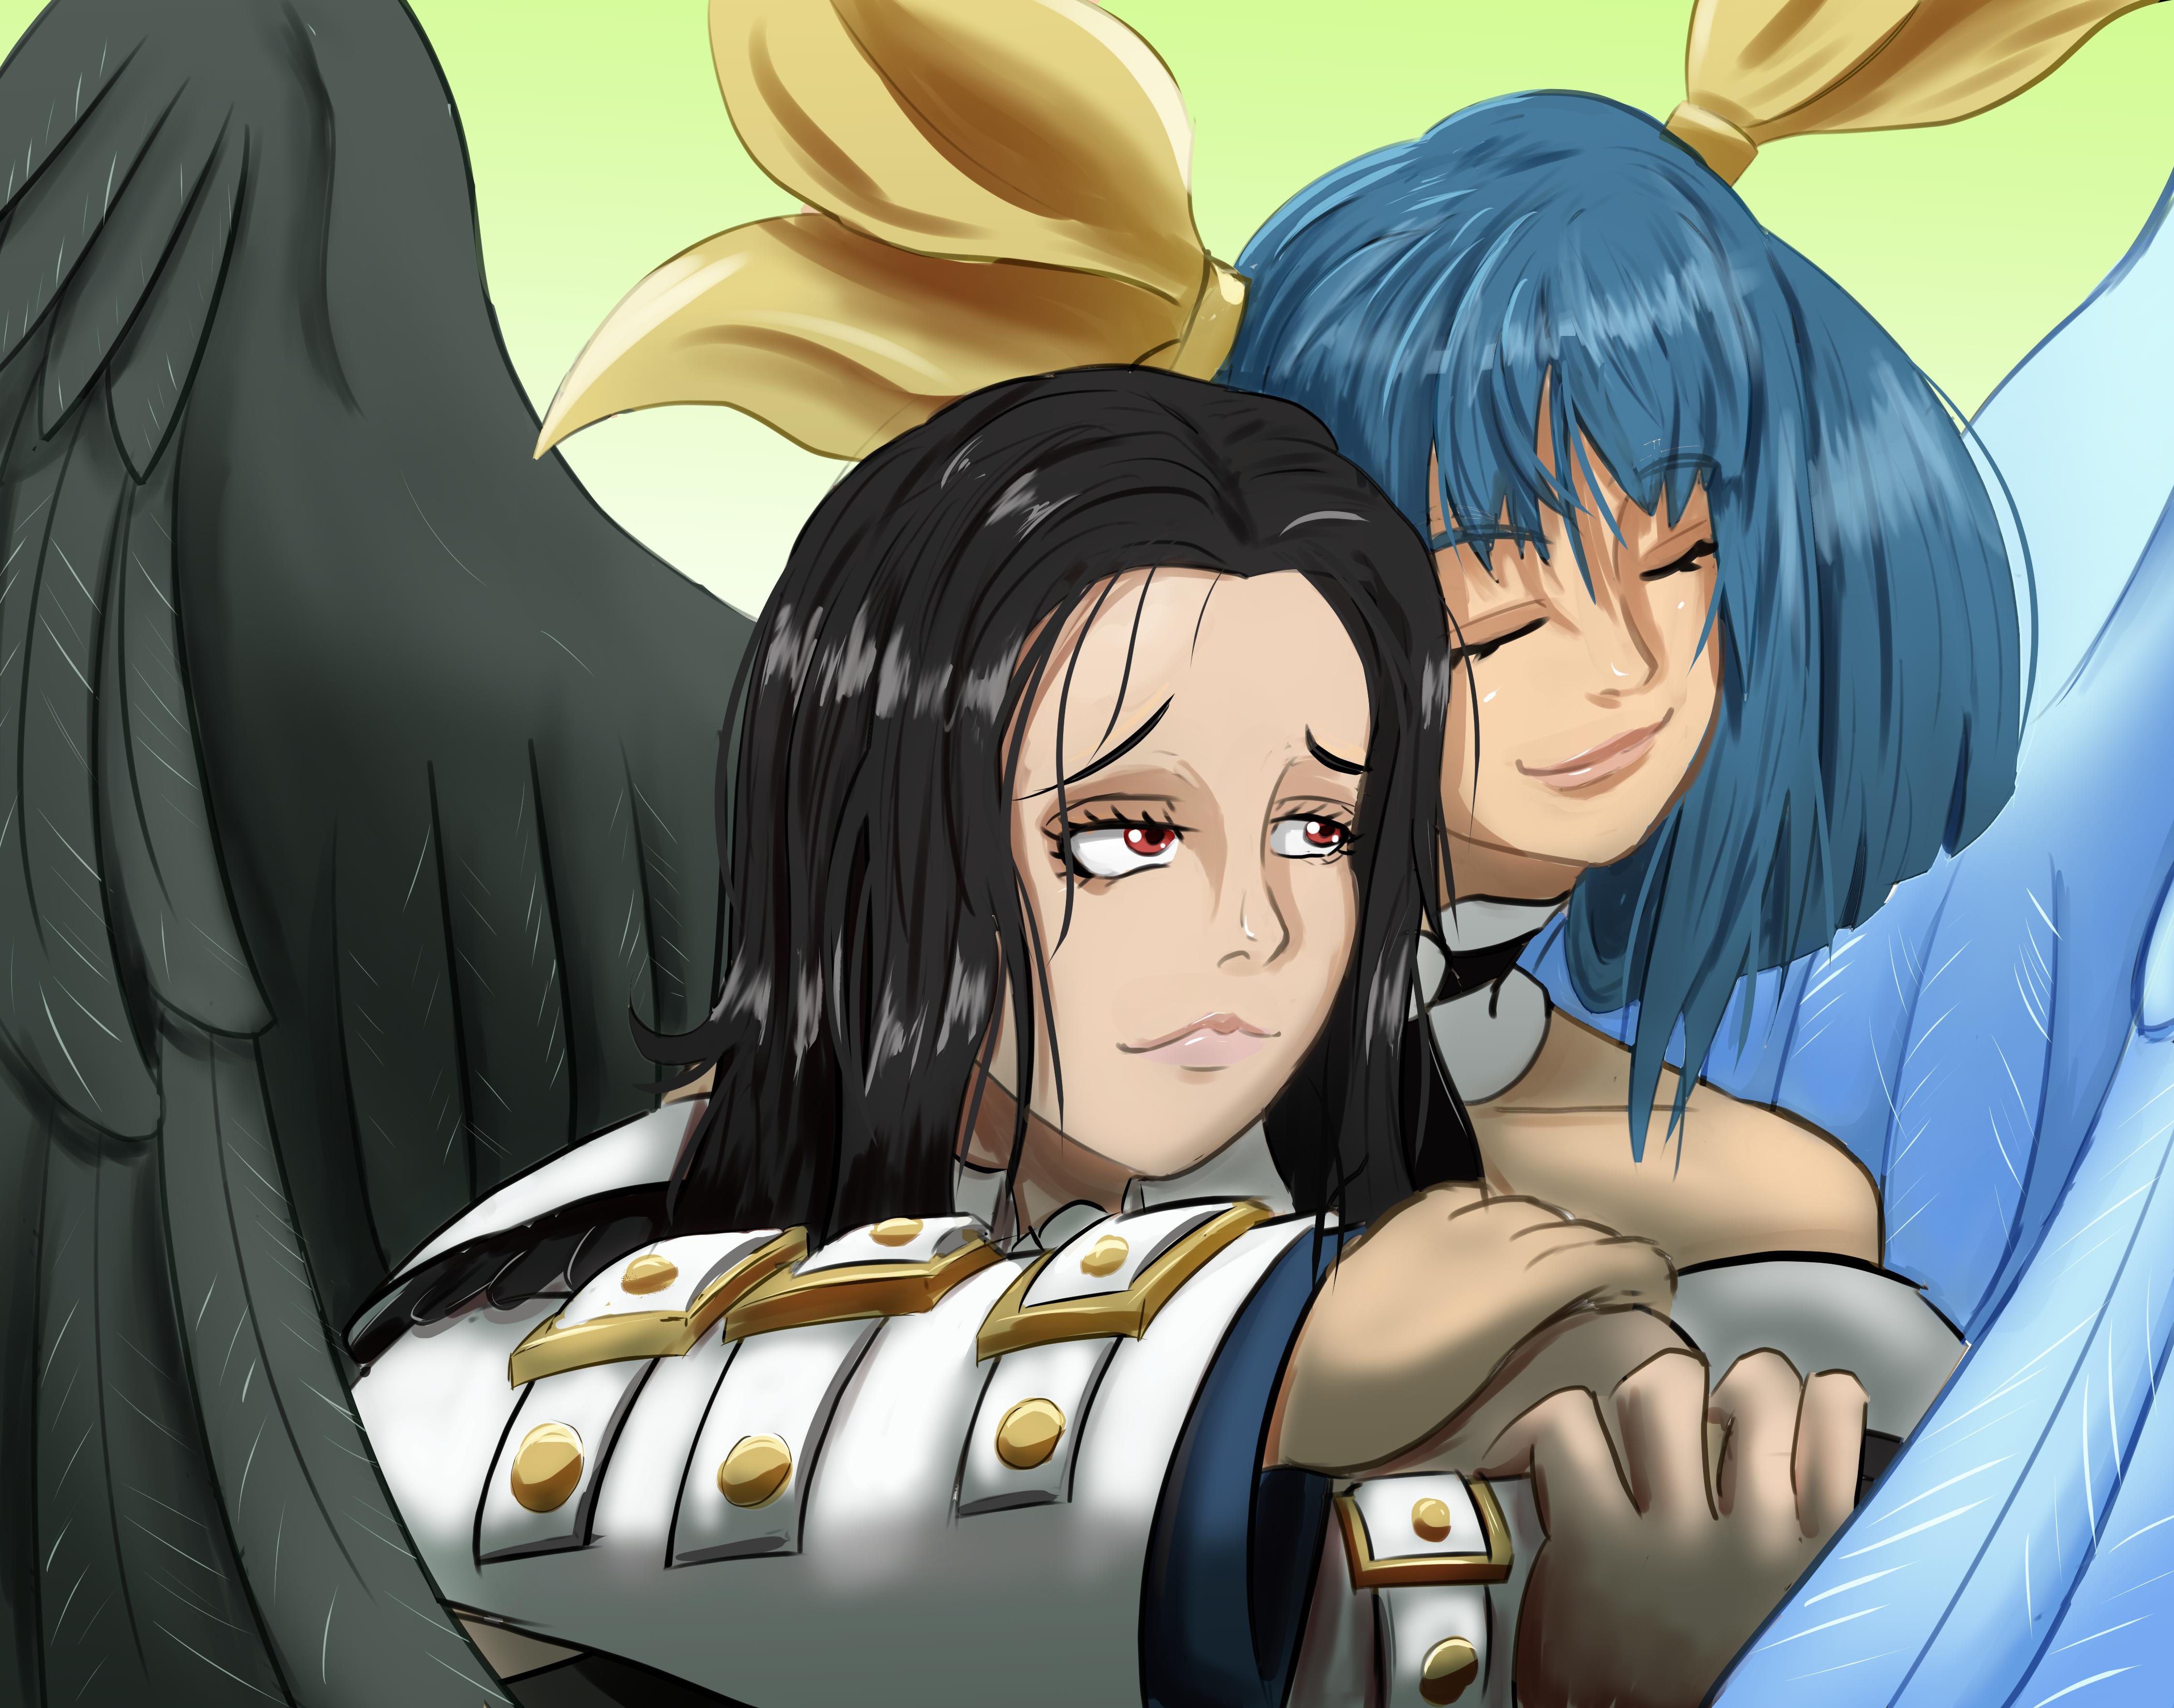 Guilty Gear Guilty Gear Strive Guilty Gear Xrd Dizzy Guilty Gear Anime Couple Couple Anime Girl With 4200x3300